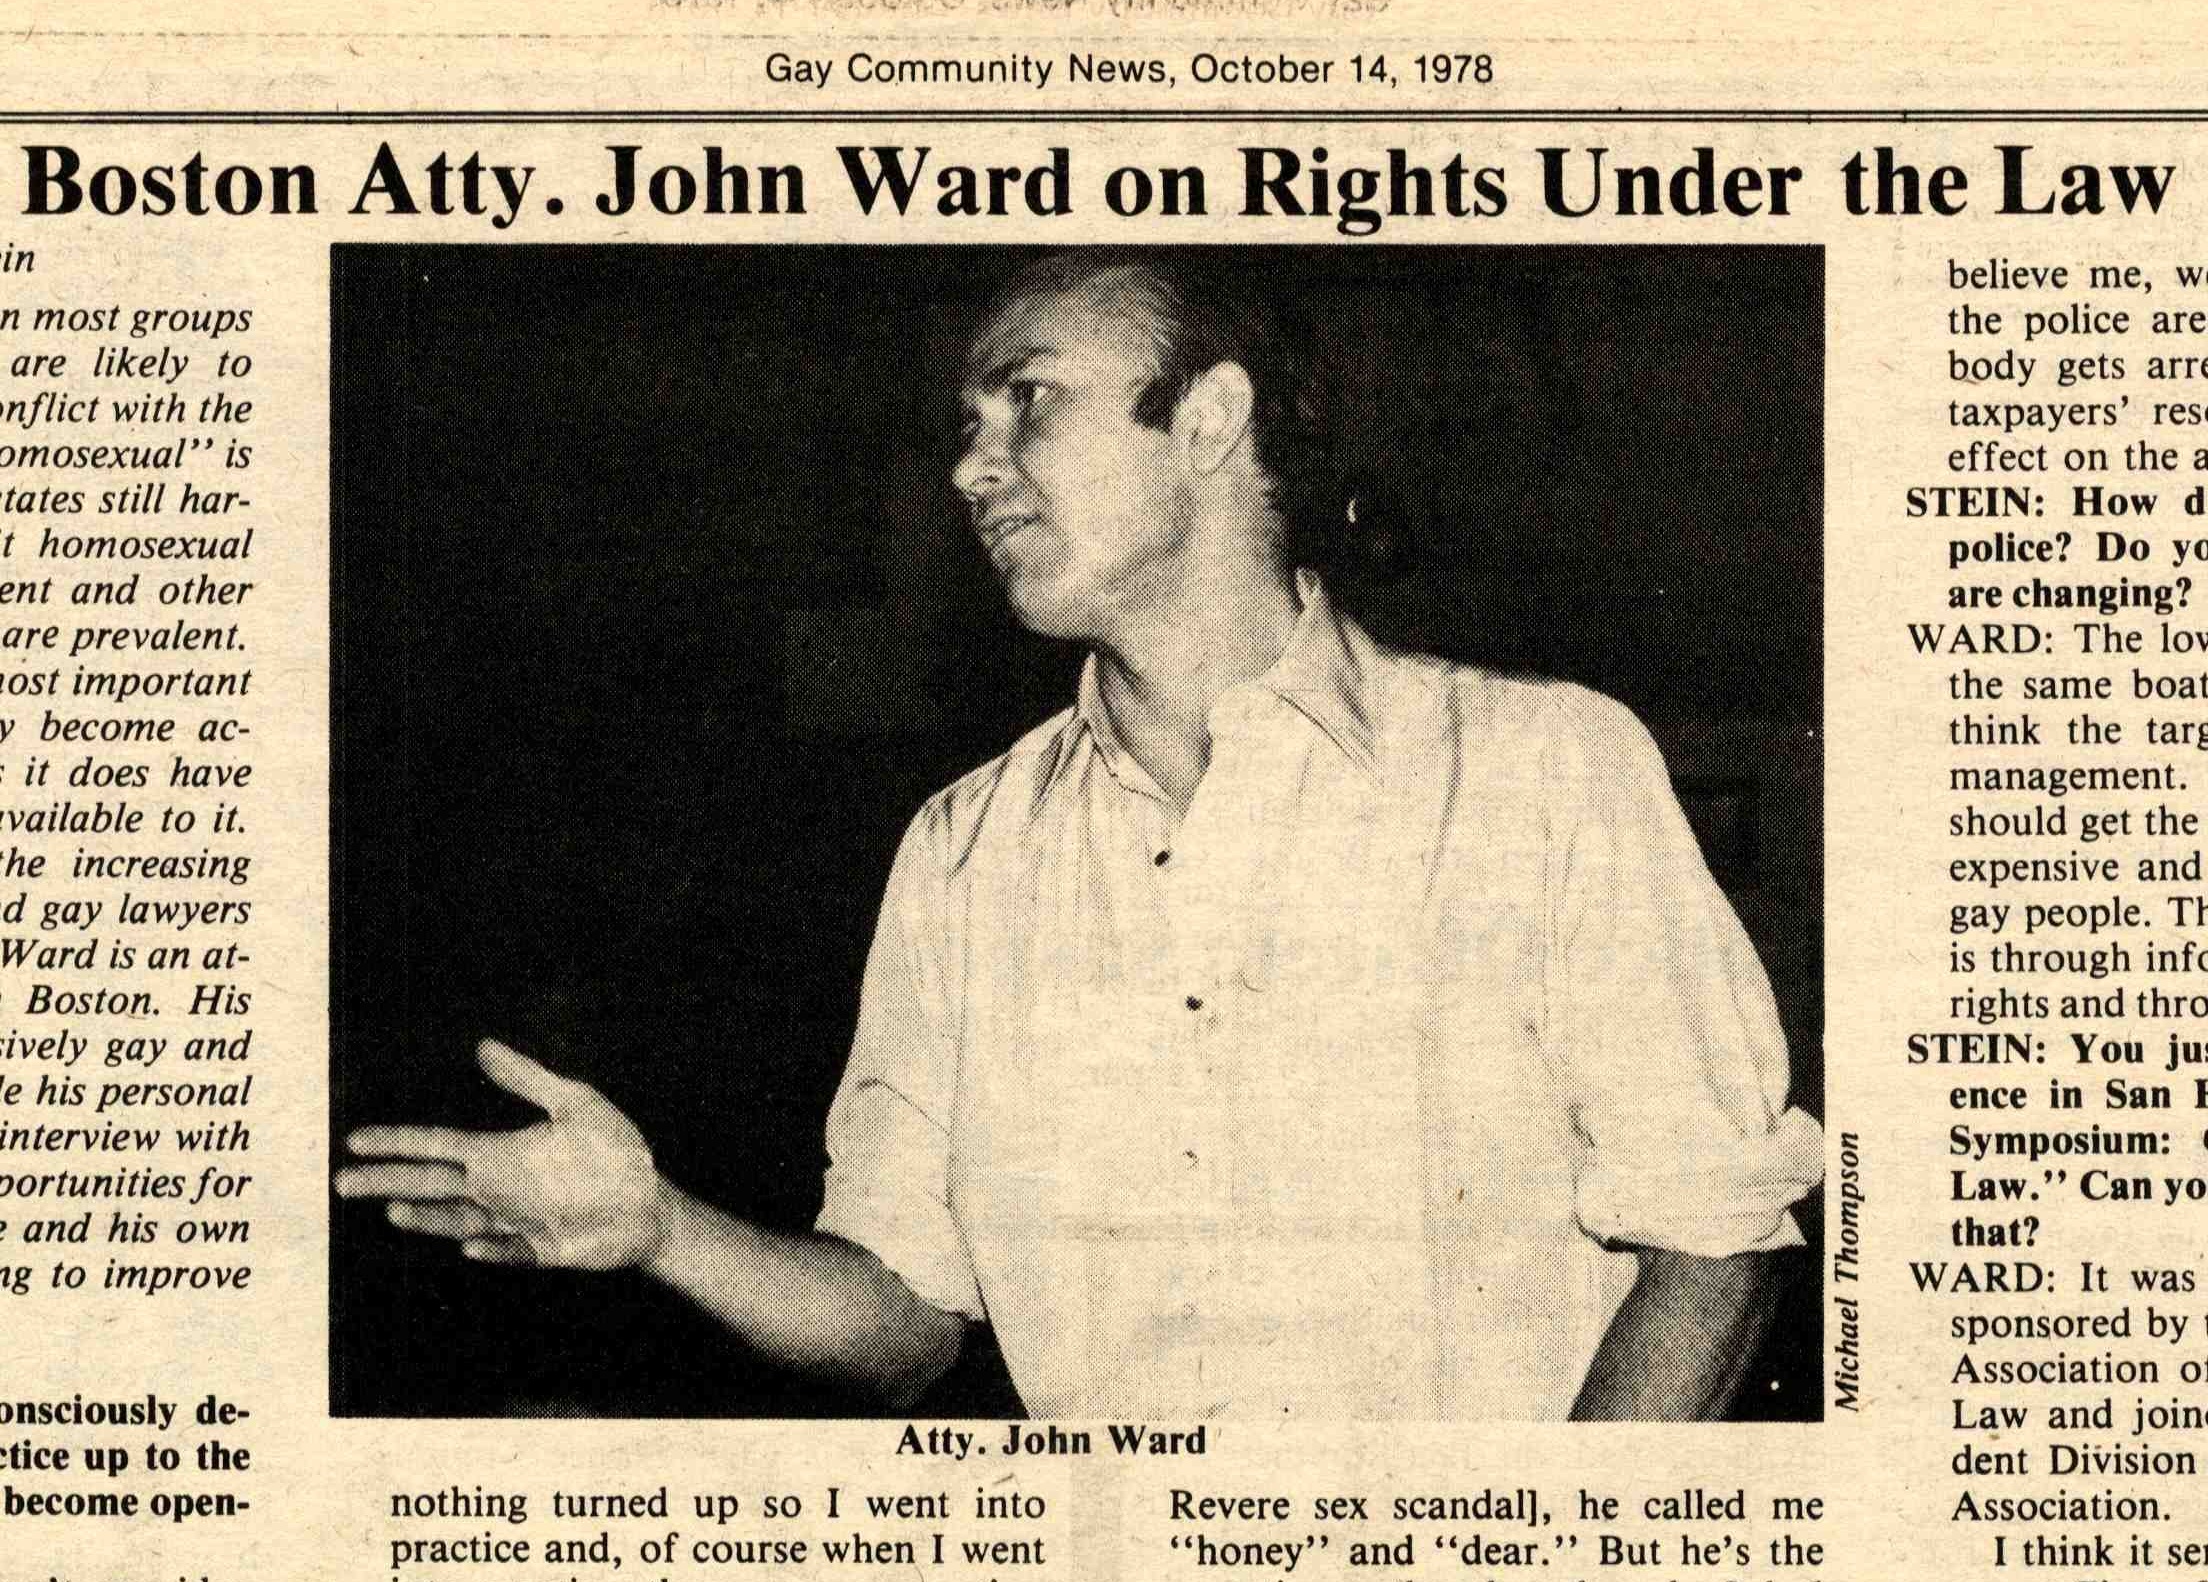 Interview with John Ward, Gay Community News, 1978